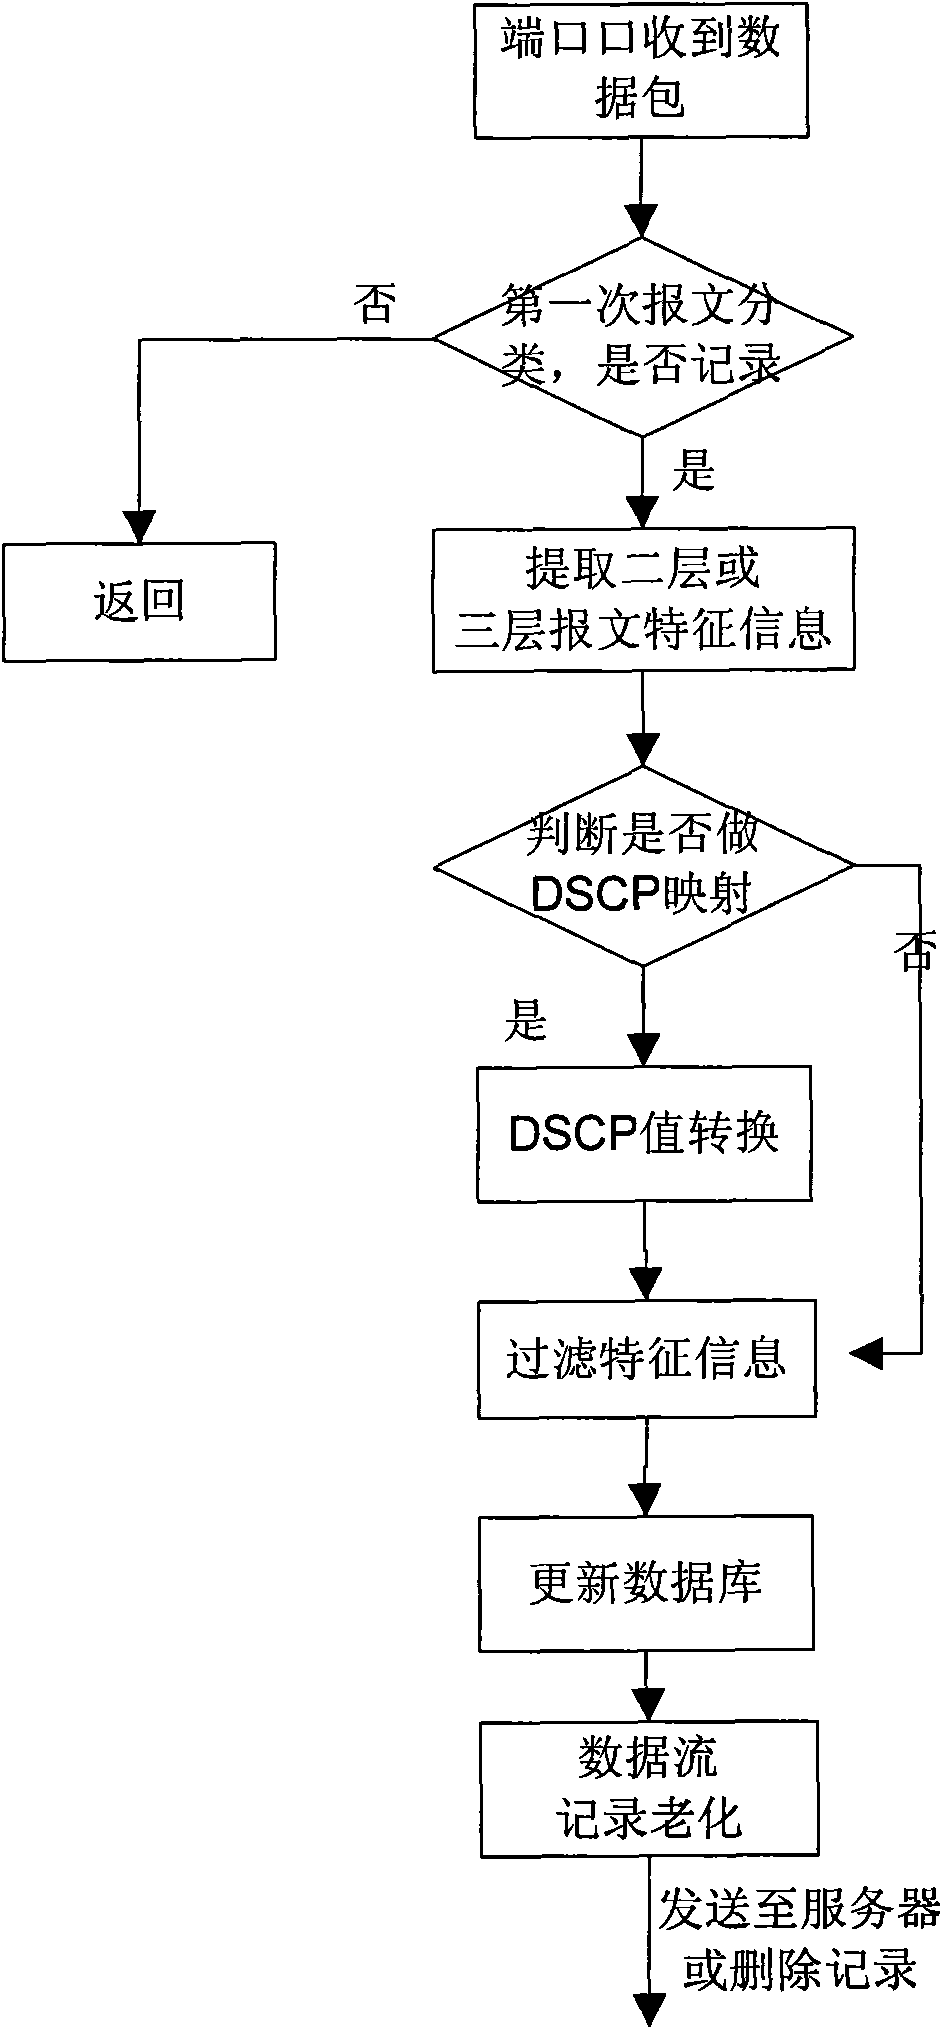 Method and device for monitoring network data flow